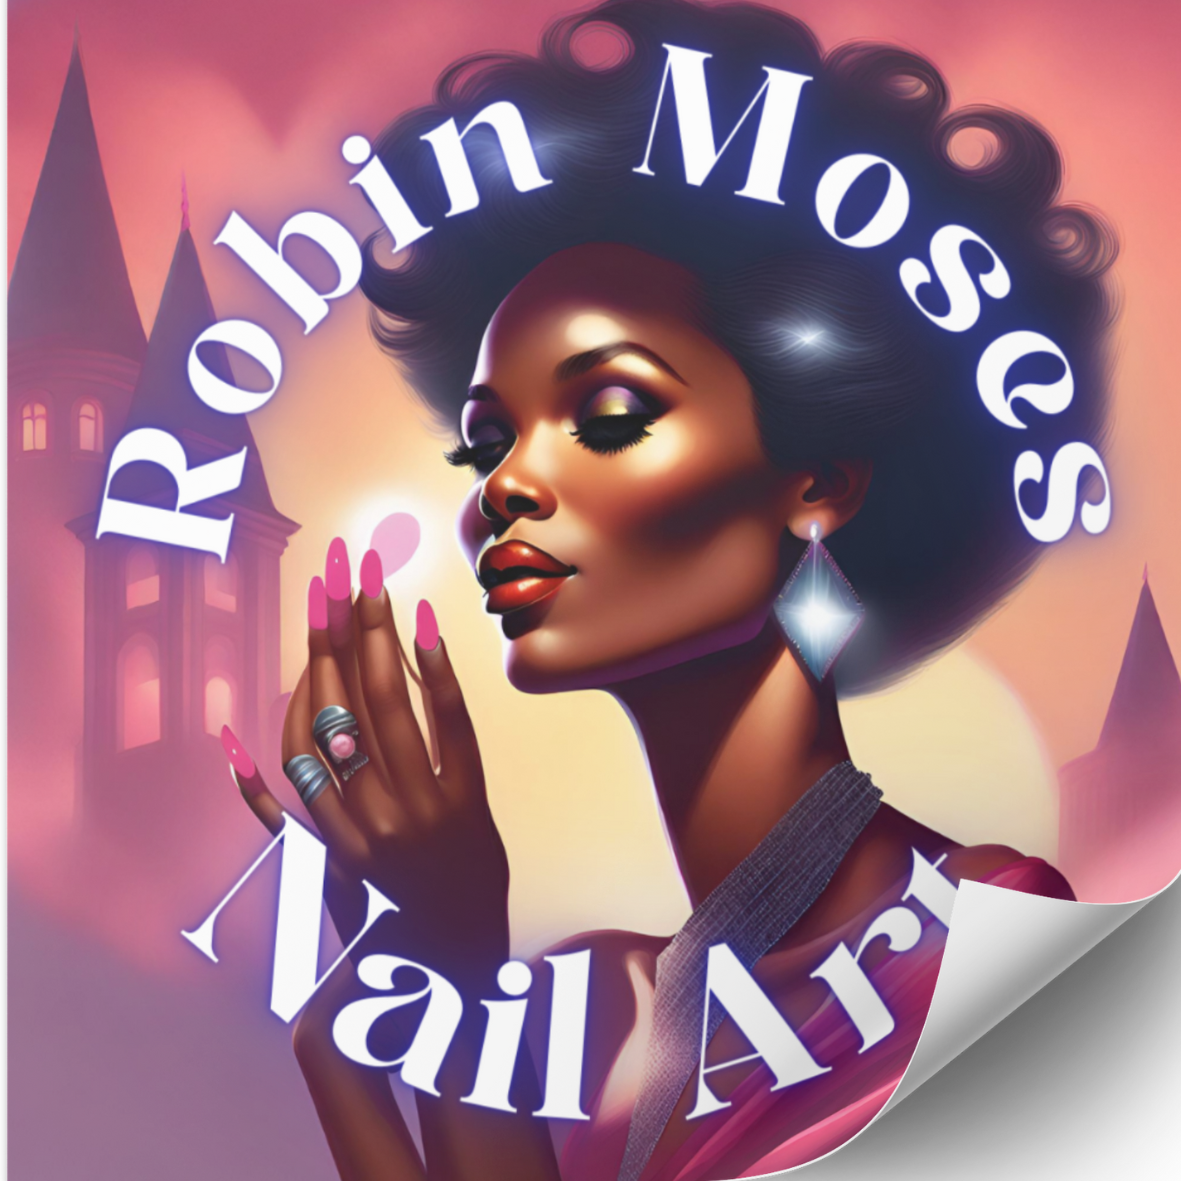 Limited Edition Valentine's Day Sticker #3 by Robin Moses Nail Art